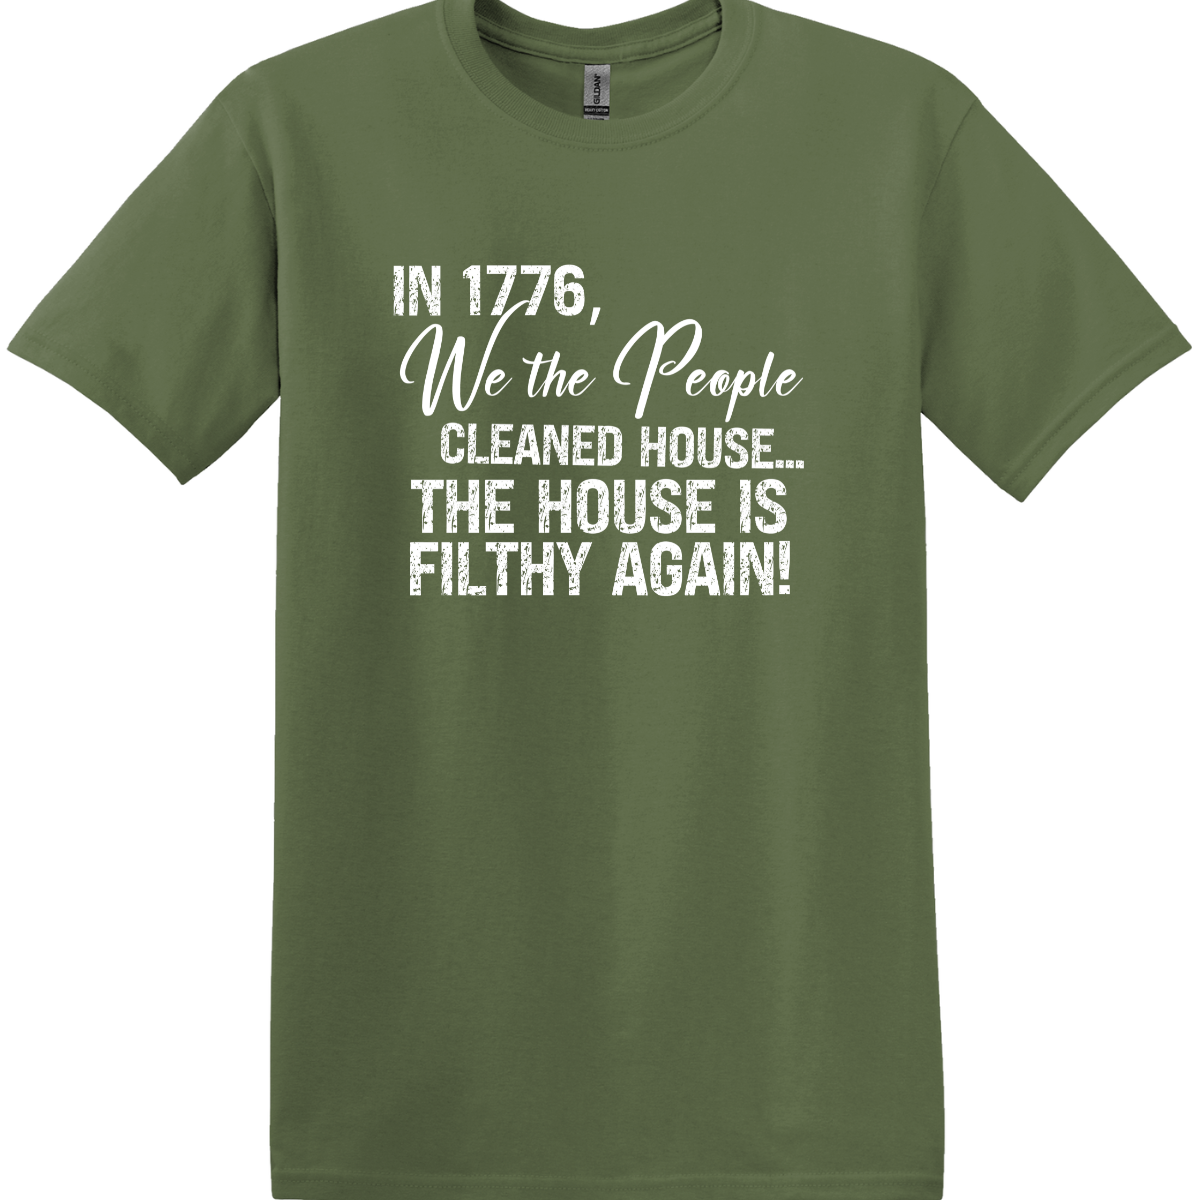 The House Is Filthy Again Tee